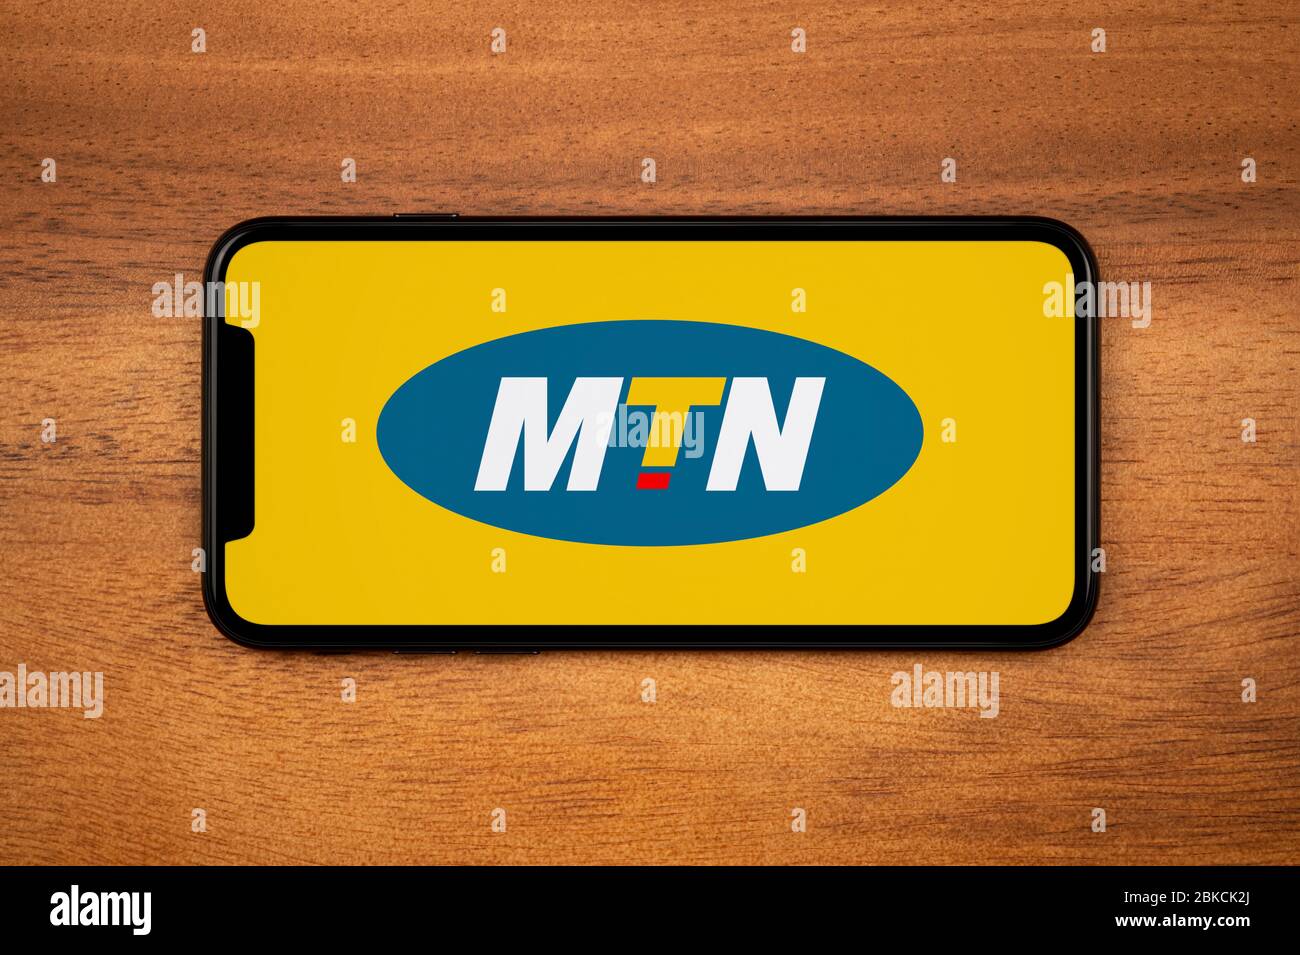 A smartphone showing the MTN logo rests on a plain wooden table (Editorial use only). Stock Photo